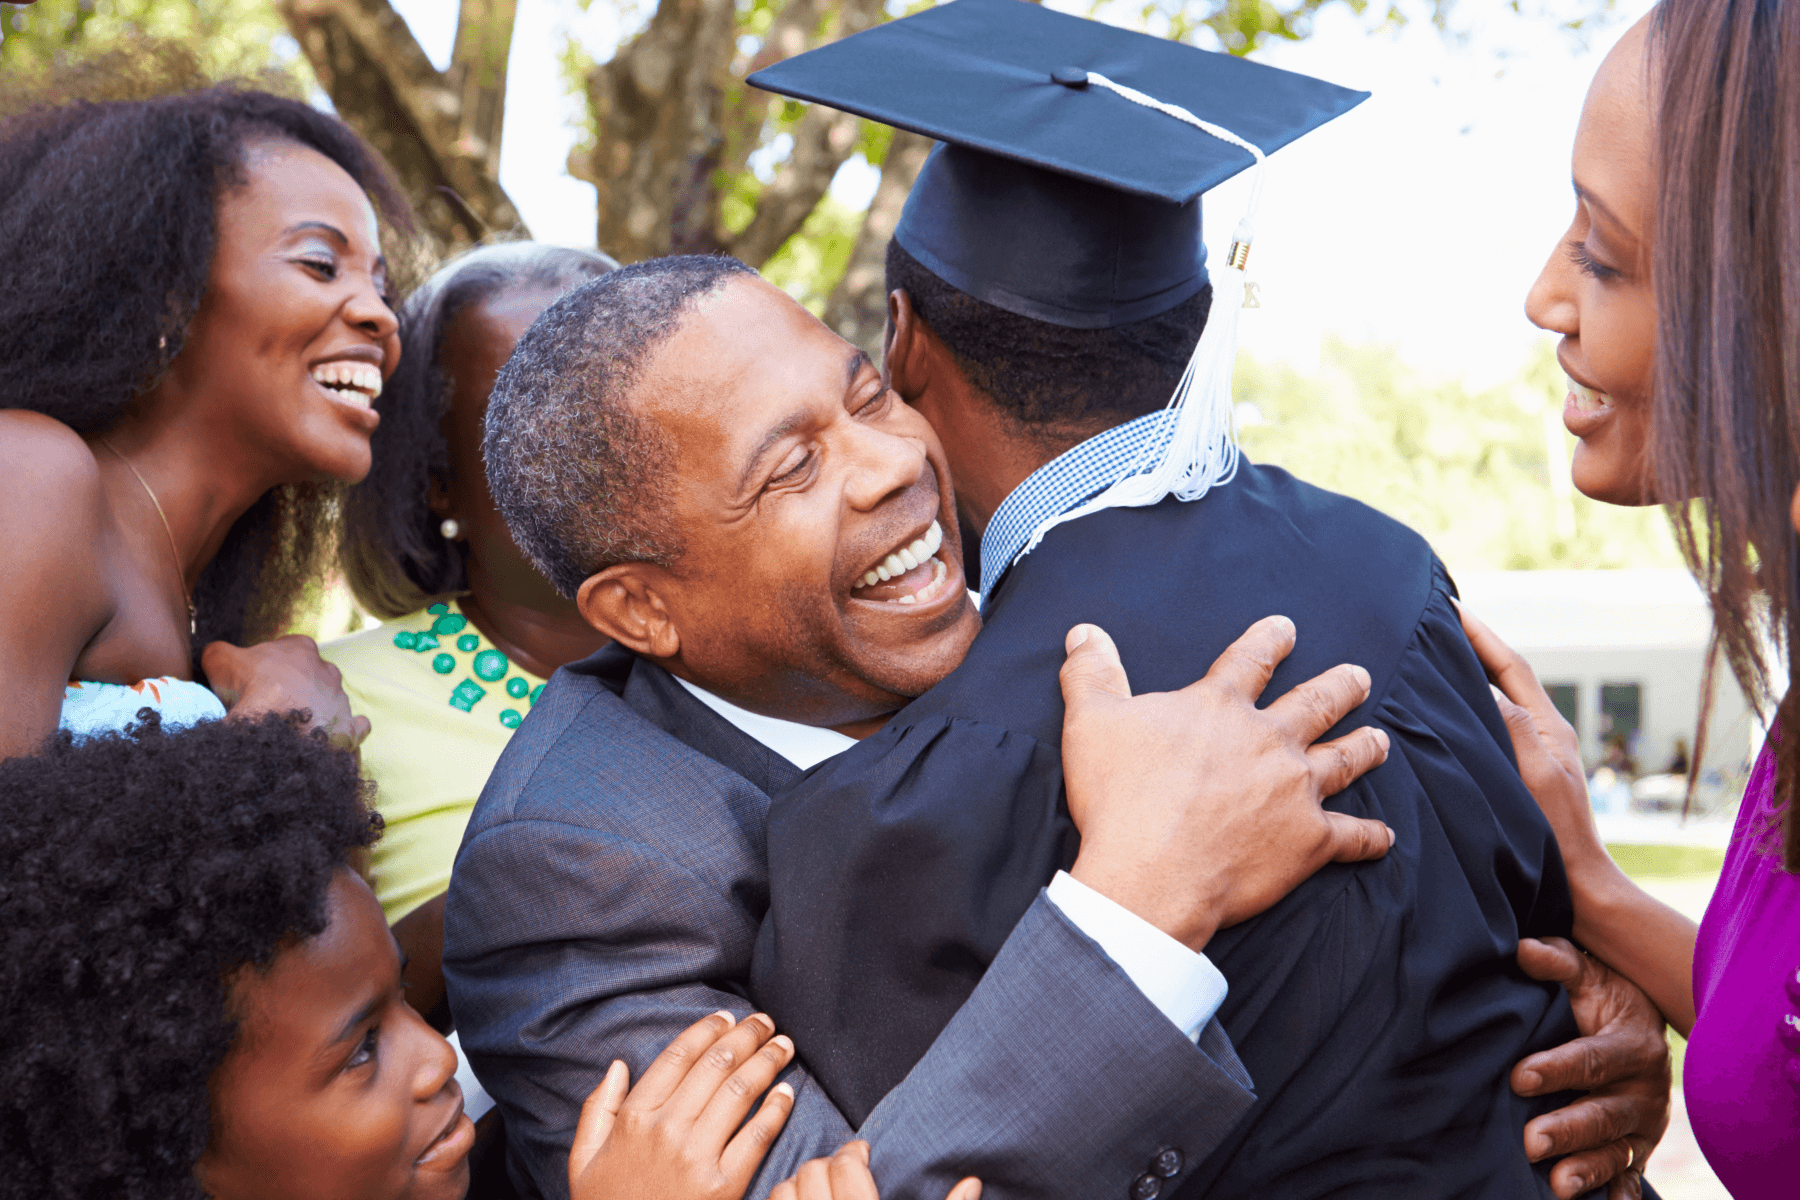 A man hugs someone in a cap and gown as family looks on smiling